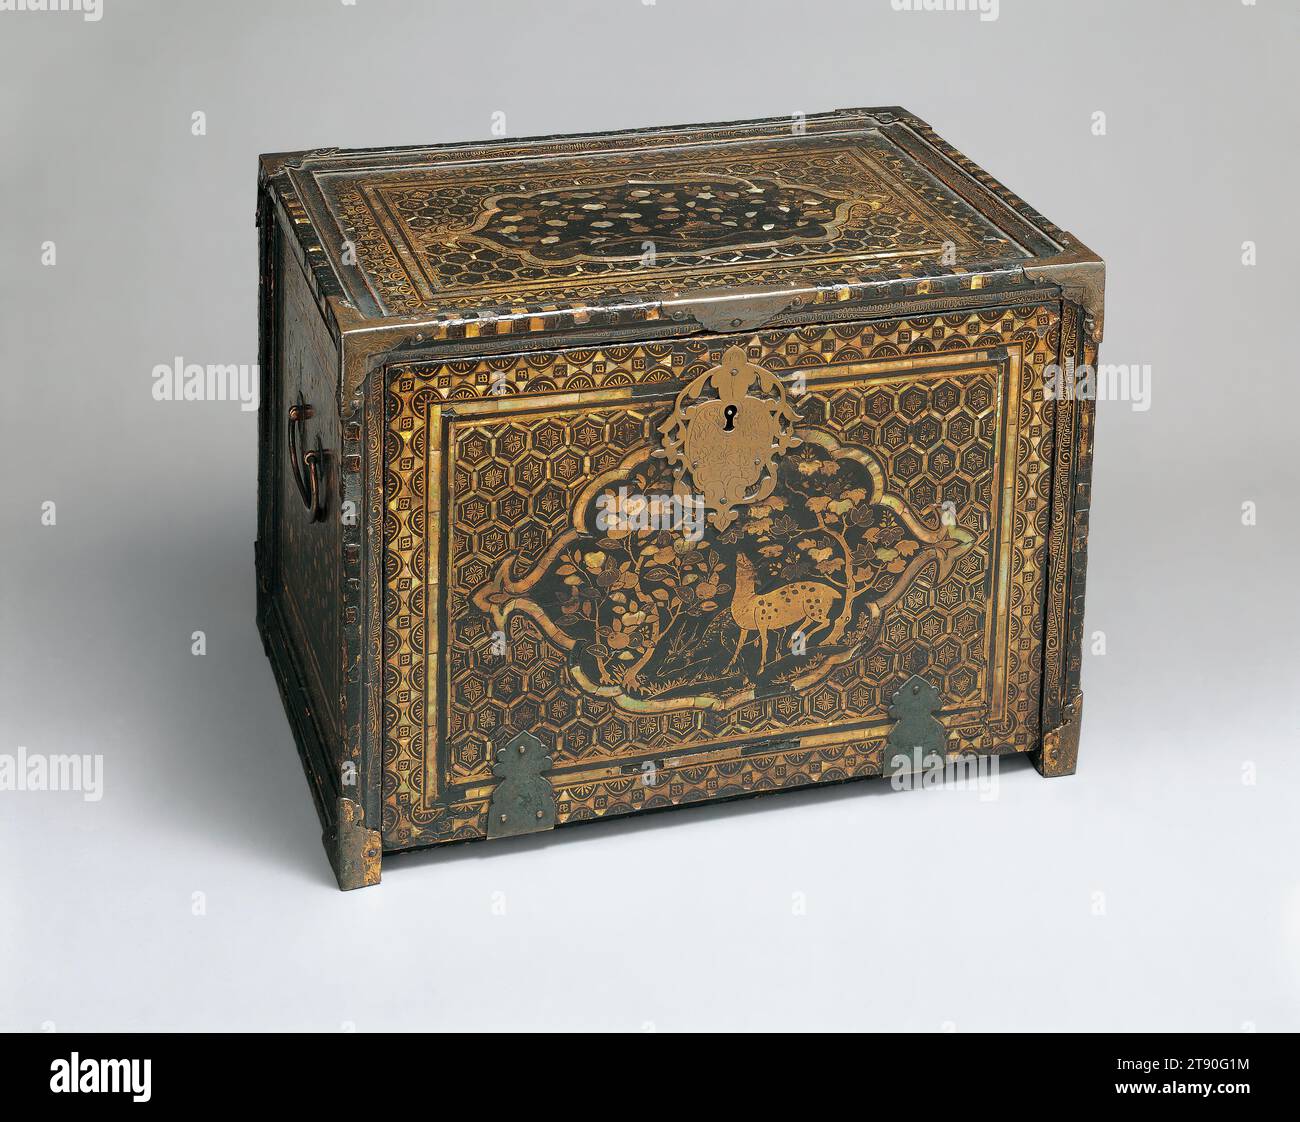 Portable desk, early 17th century, Unknown Japanese, 12 3/8 × 17 1/8 × 12 1/8 in. (31.43 × 43.5 × 30.8 cm), Black lacquer with gold and silver maki-e and mother-of-pearl inlay; metal fittings, Japan, 17th century, European merchants and missionaries in Japan discovered the beauty of lacquer in 1543 and began commissioning artists to create furnishings for European homes and churches soon thereafter. By 1610, an import company was established in Amsterdam to meet demand. This portable desk has a drop front and small drawers inside for storing writing supplies, making it a bargueño Stock Photo